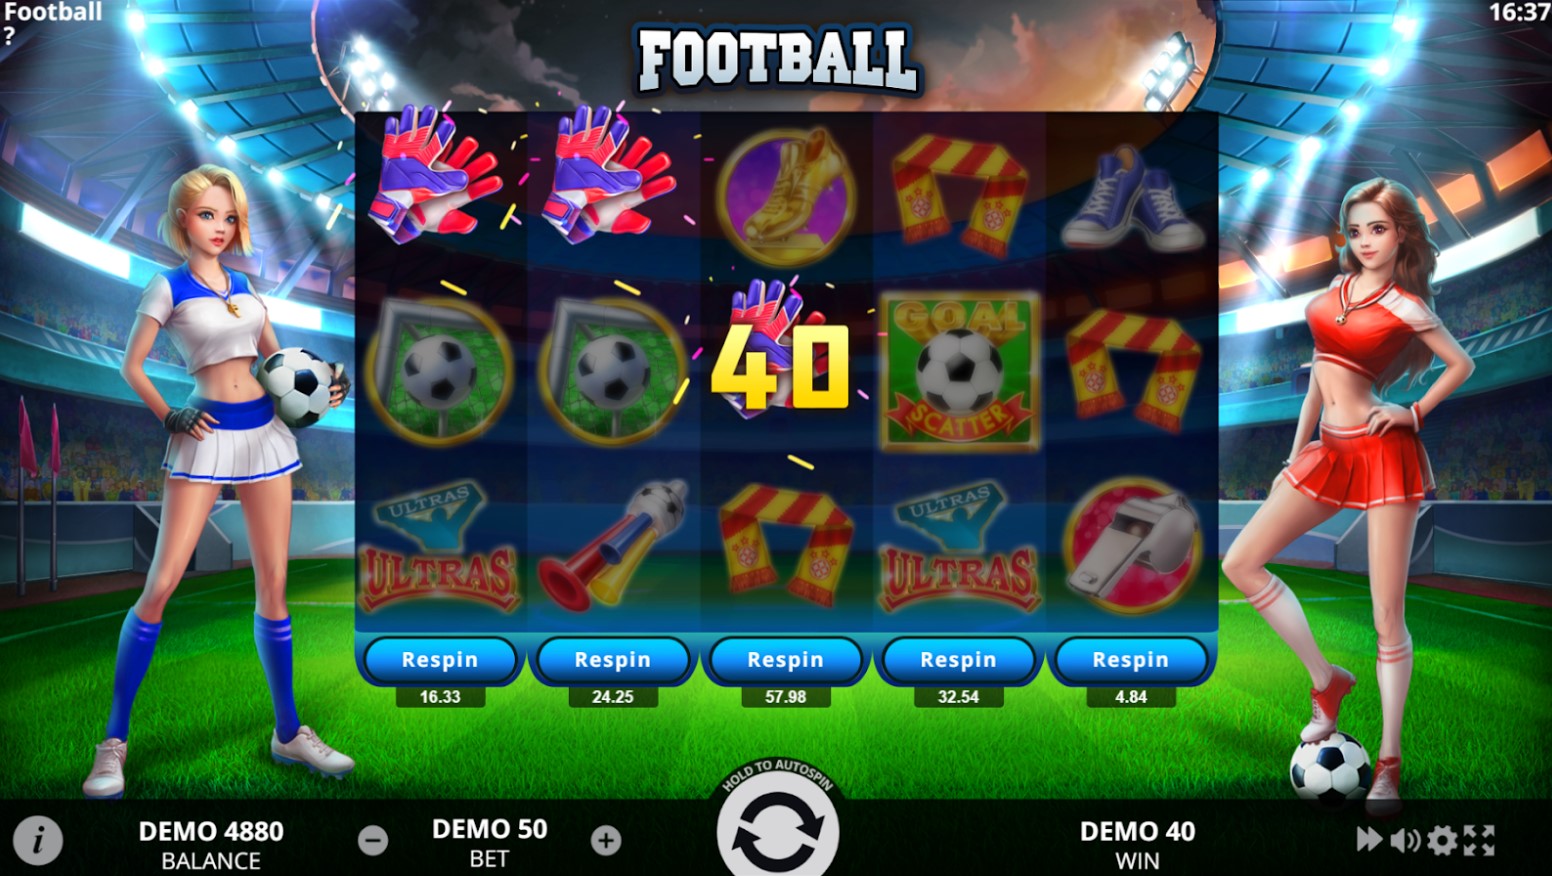 The Best Casino Games That Pay Real Money for Football Fans